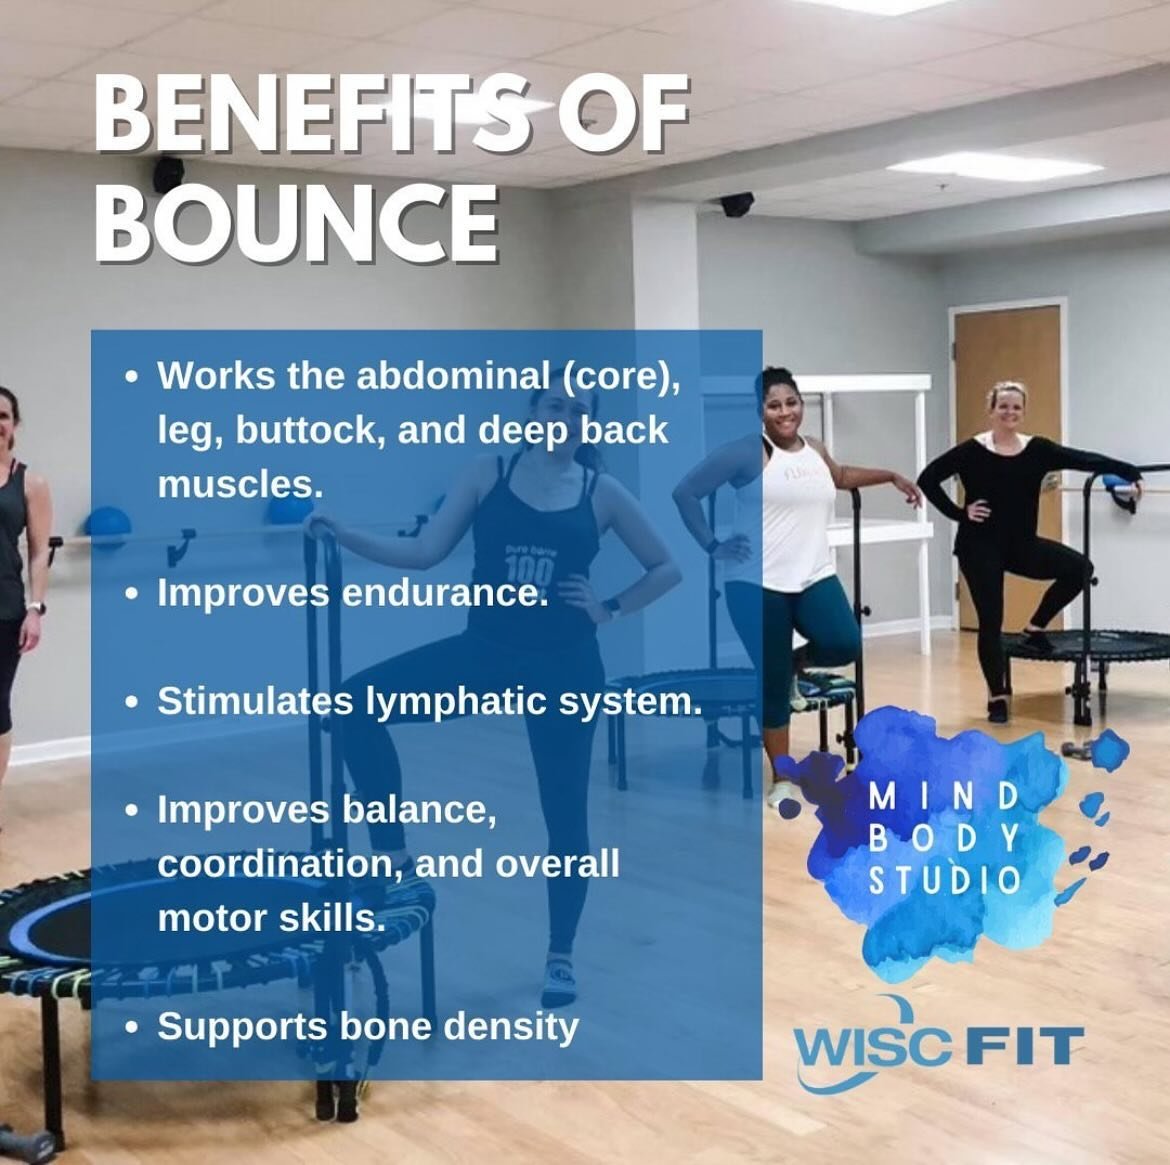 Throwback tunes for this super FUN &amp; effective workout 🎵 

Check out all those benefits of bounce!

Jump into a class today!
https://apps.daysmartrecreation.com/dash/x/#/online/williamsburg/login

#rebounding #belliconjumping #reboundingworkout 